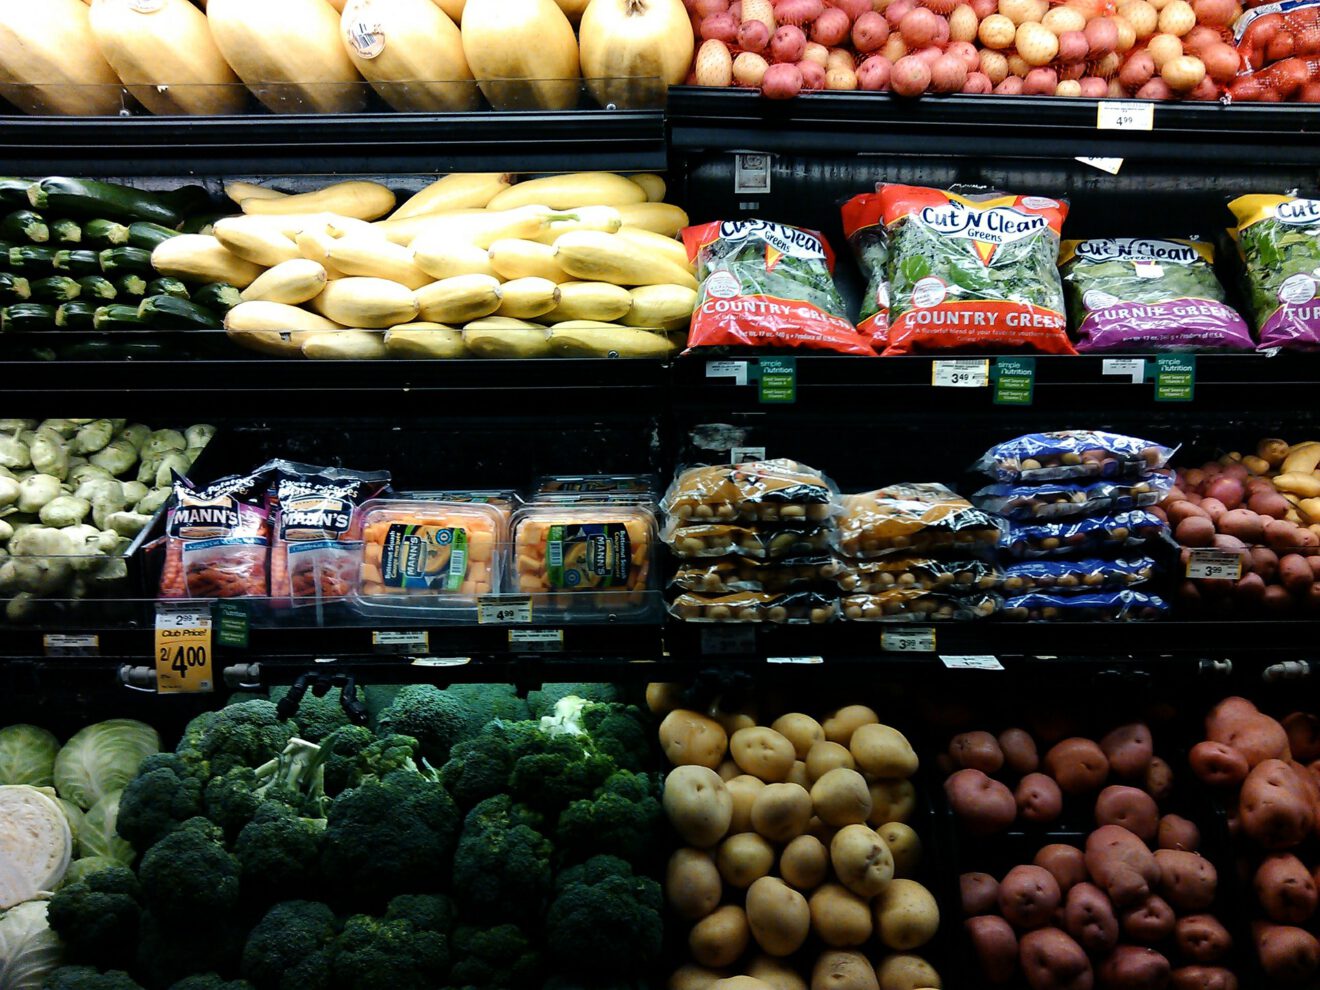 Focus on fresh is key when courting today’s grocery shopper